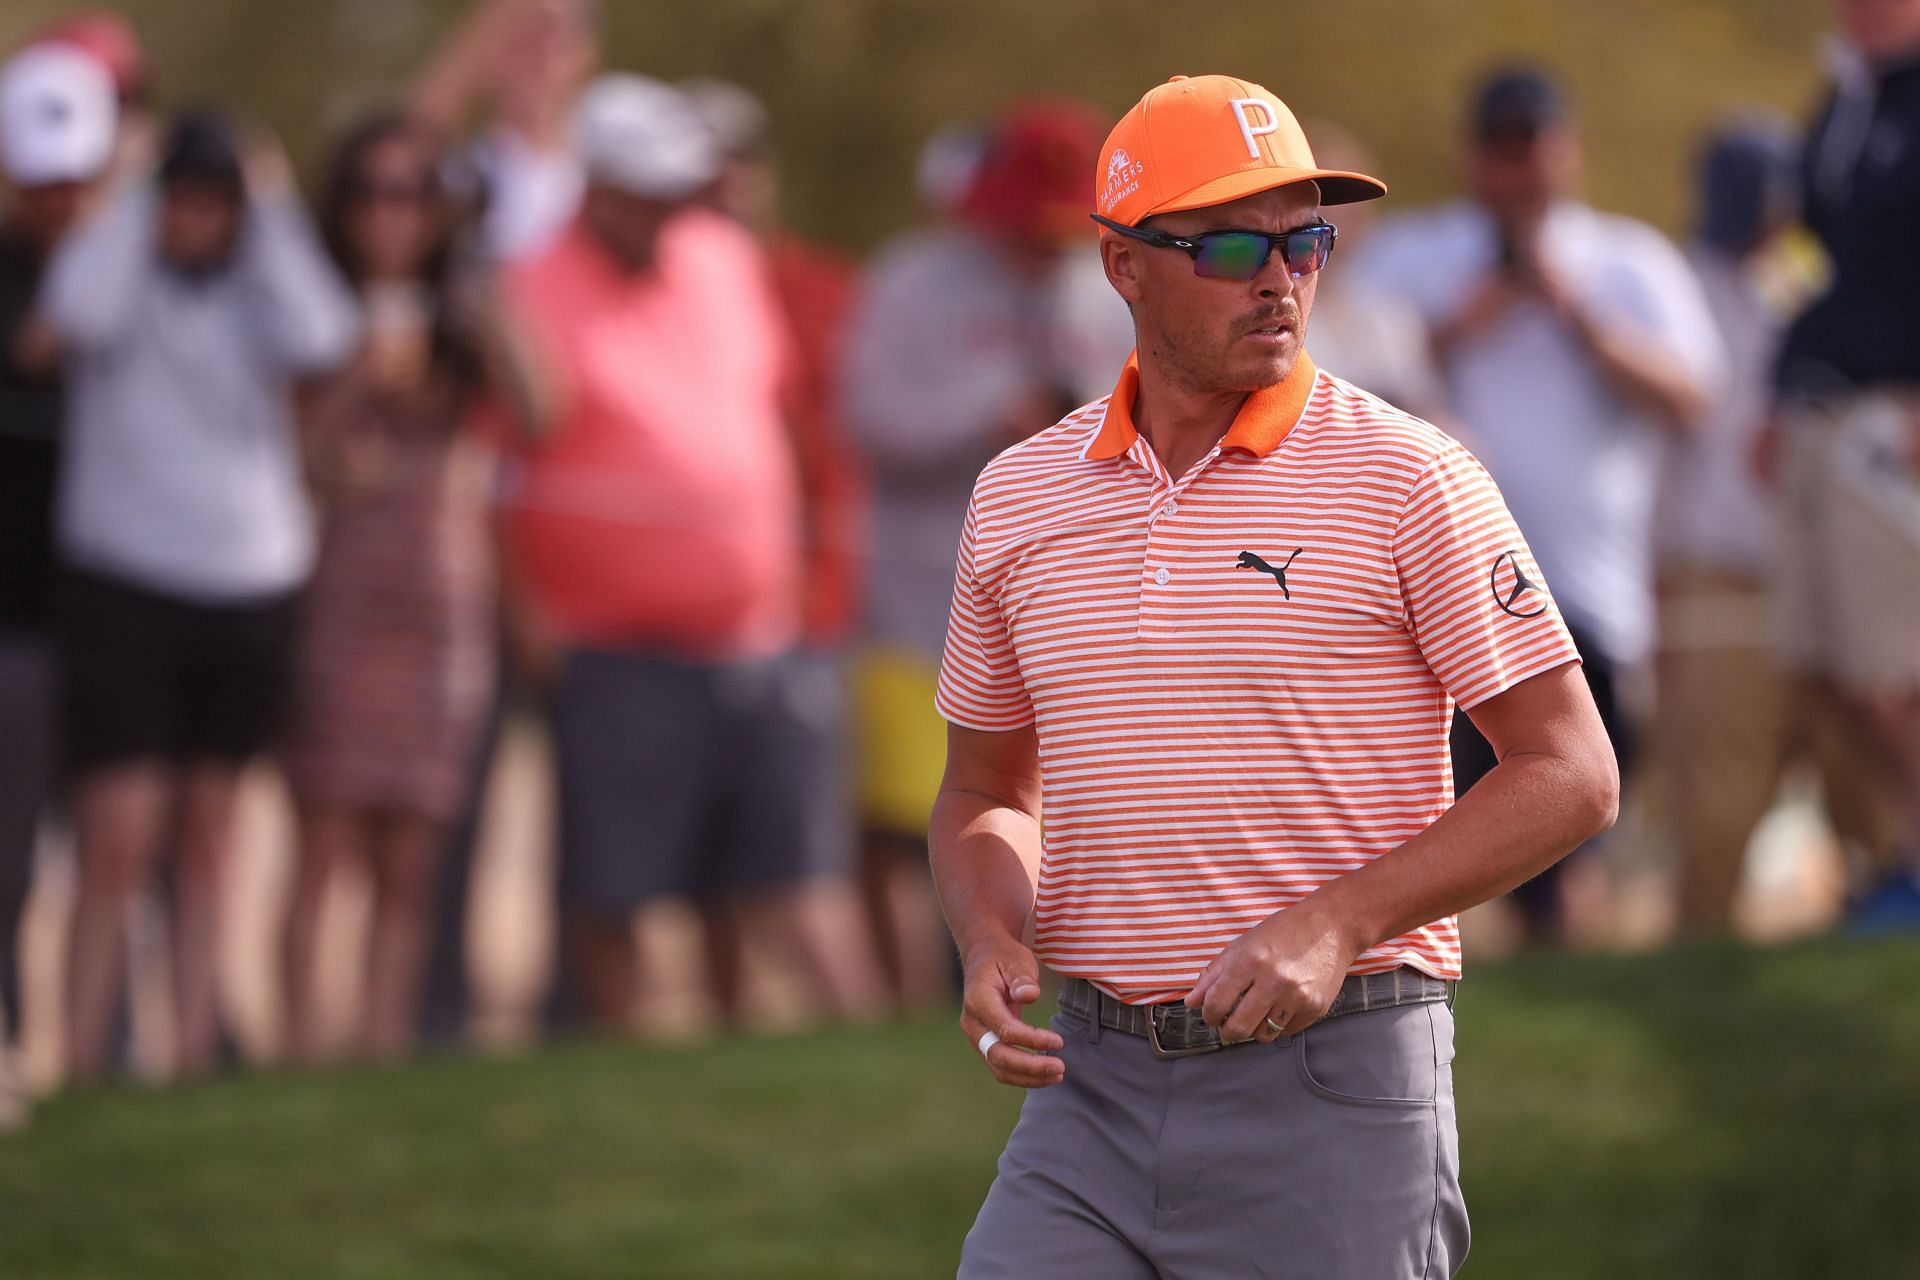 “Coolest man in golf”: Fans react to Rickie Fowler’s sensational hole ...